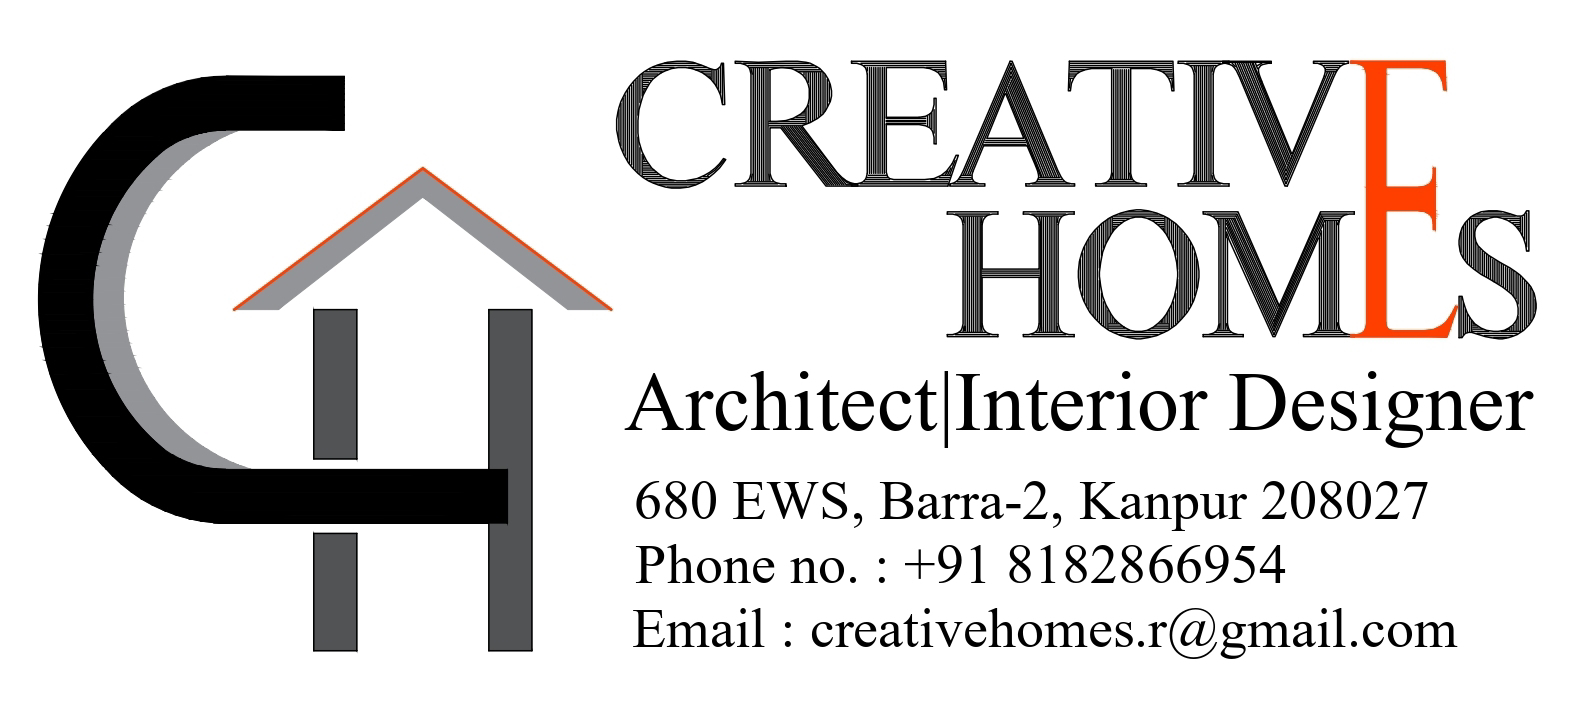 Creative Homes - Architect | Interior Designer|Accounting Services|Professional Services